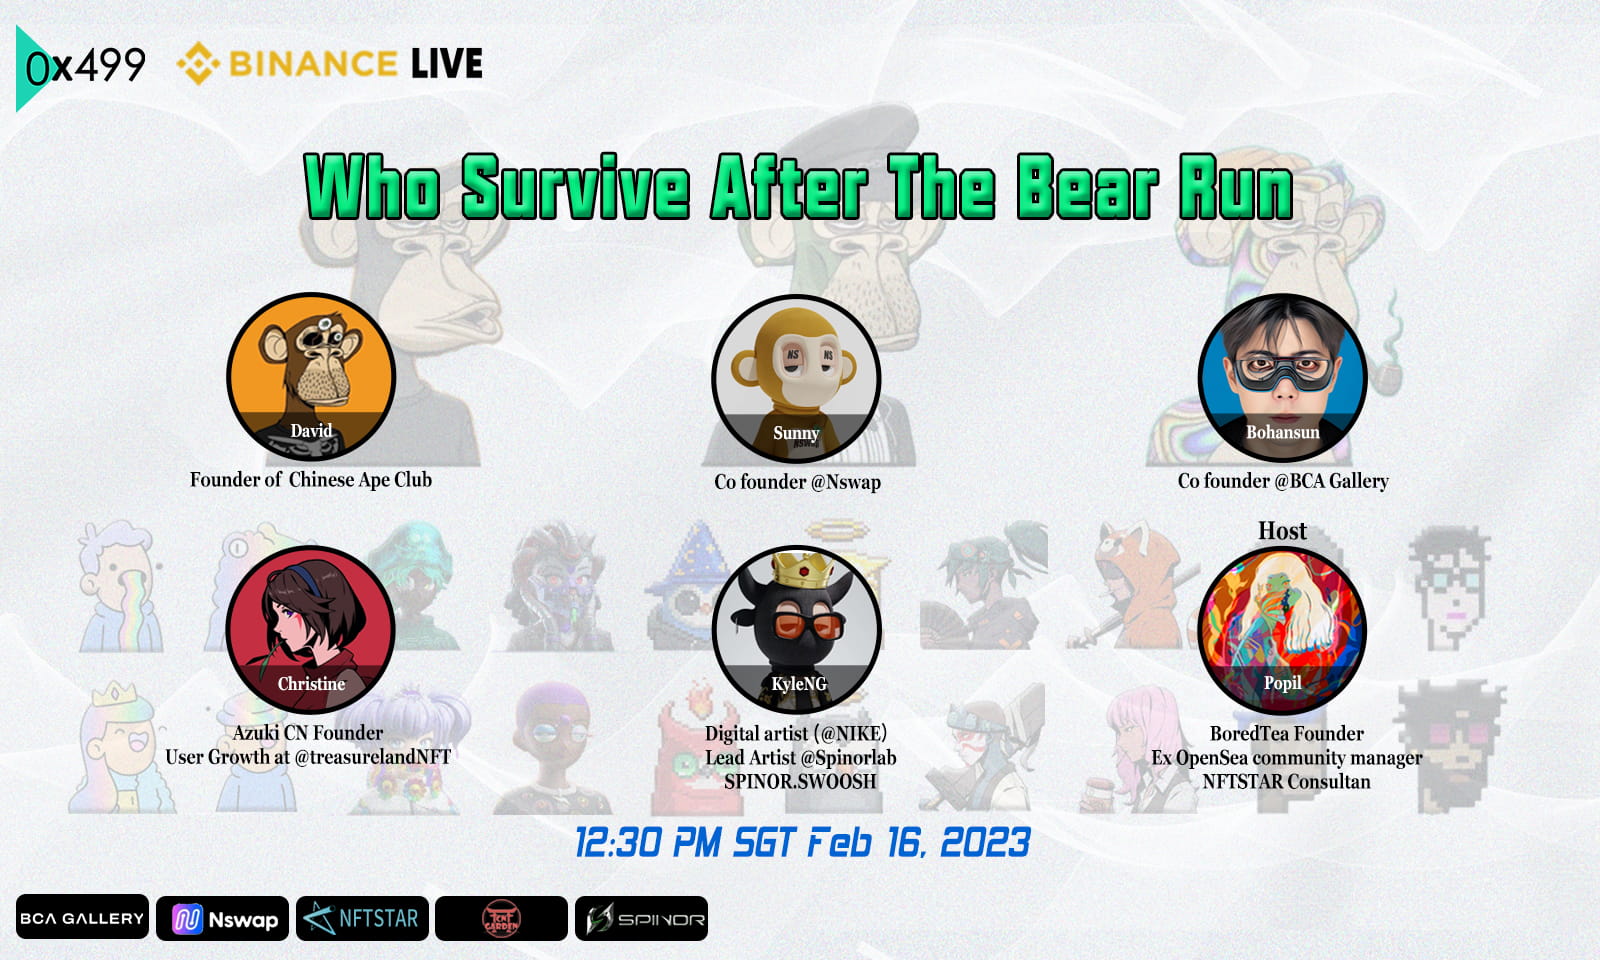 0x499: Who Survive After The Bear Run